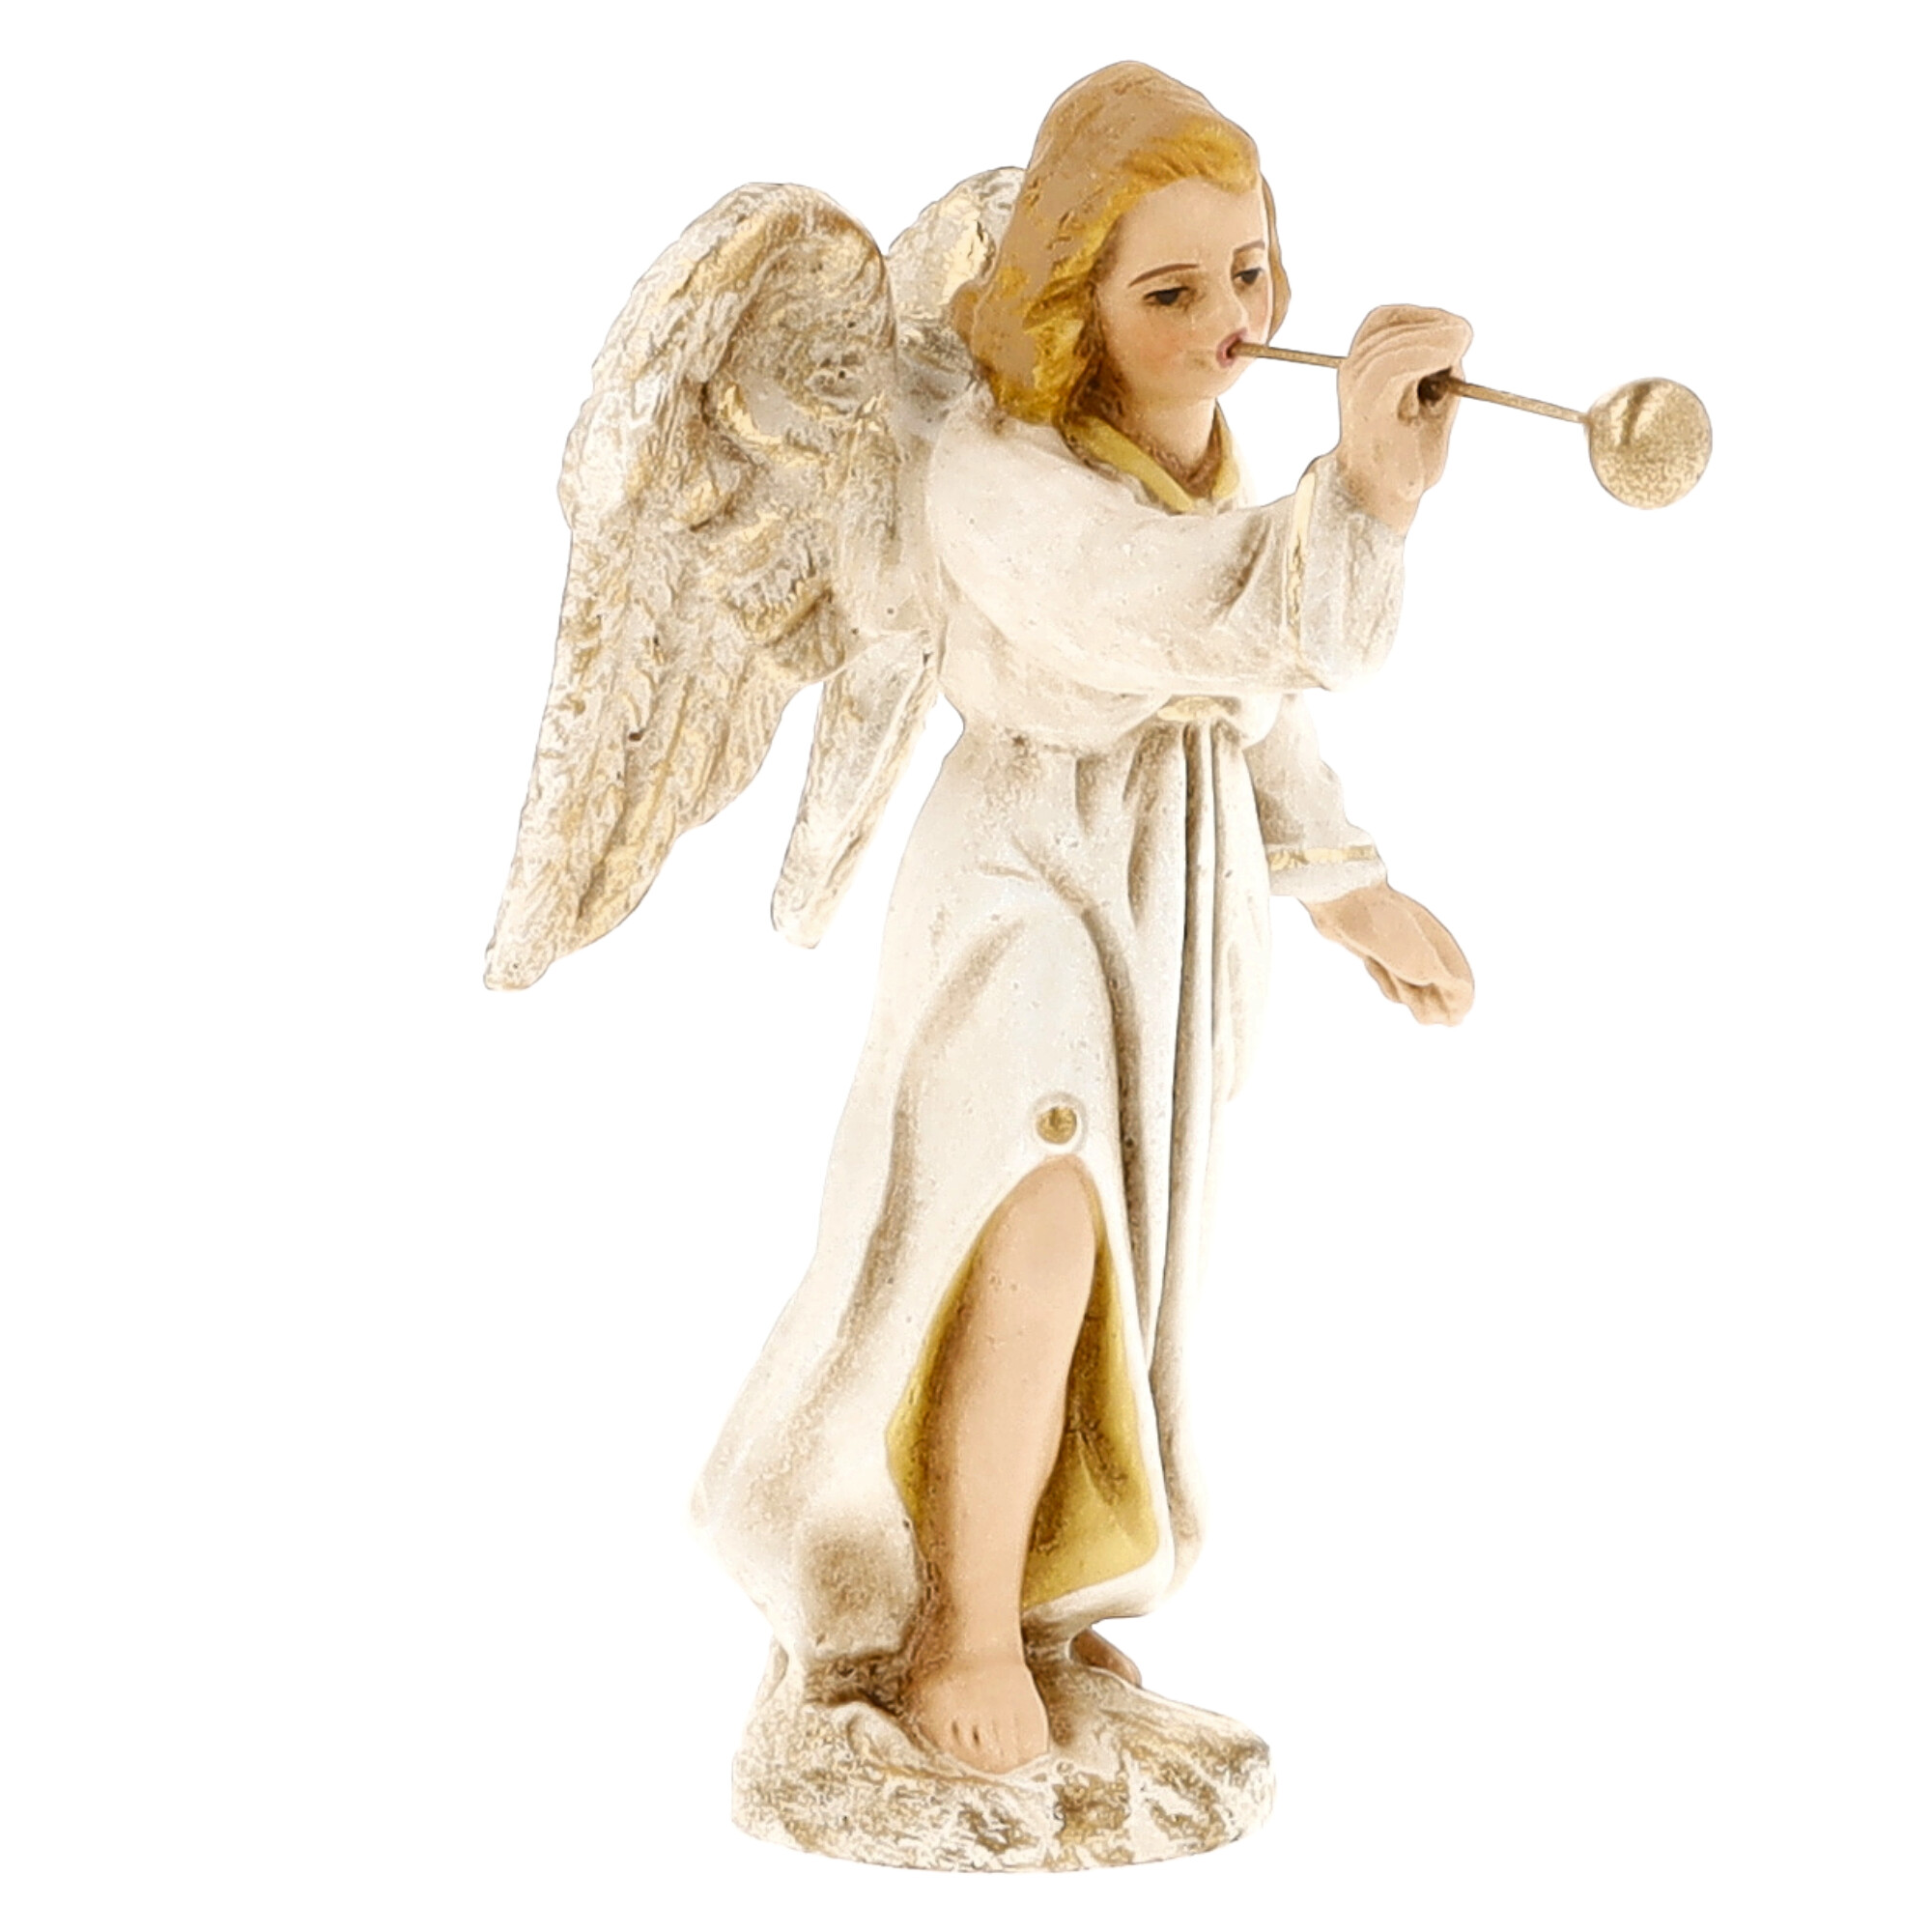 Angel with trombone, antique white, to 3.5 in. Figures